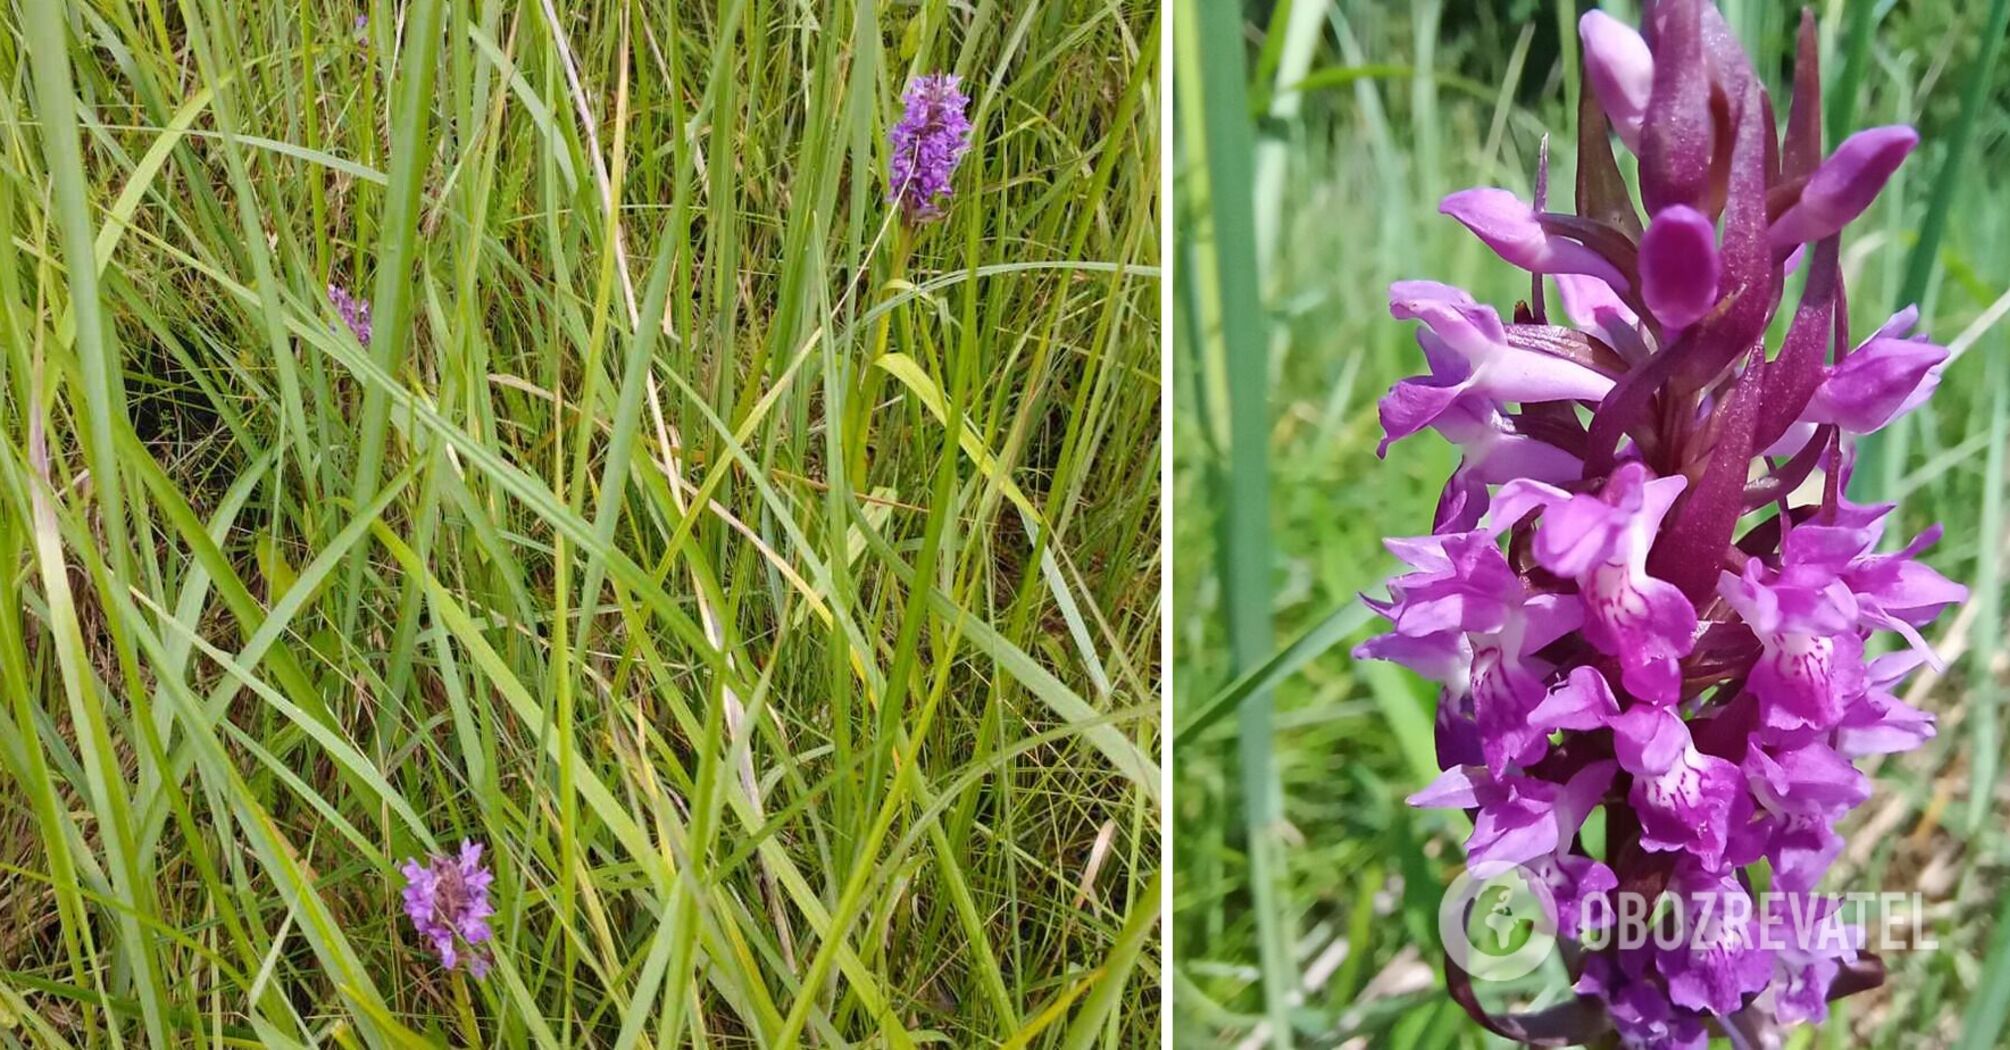 This species of orchid is listed in the Red Book of Ukraine